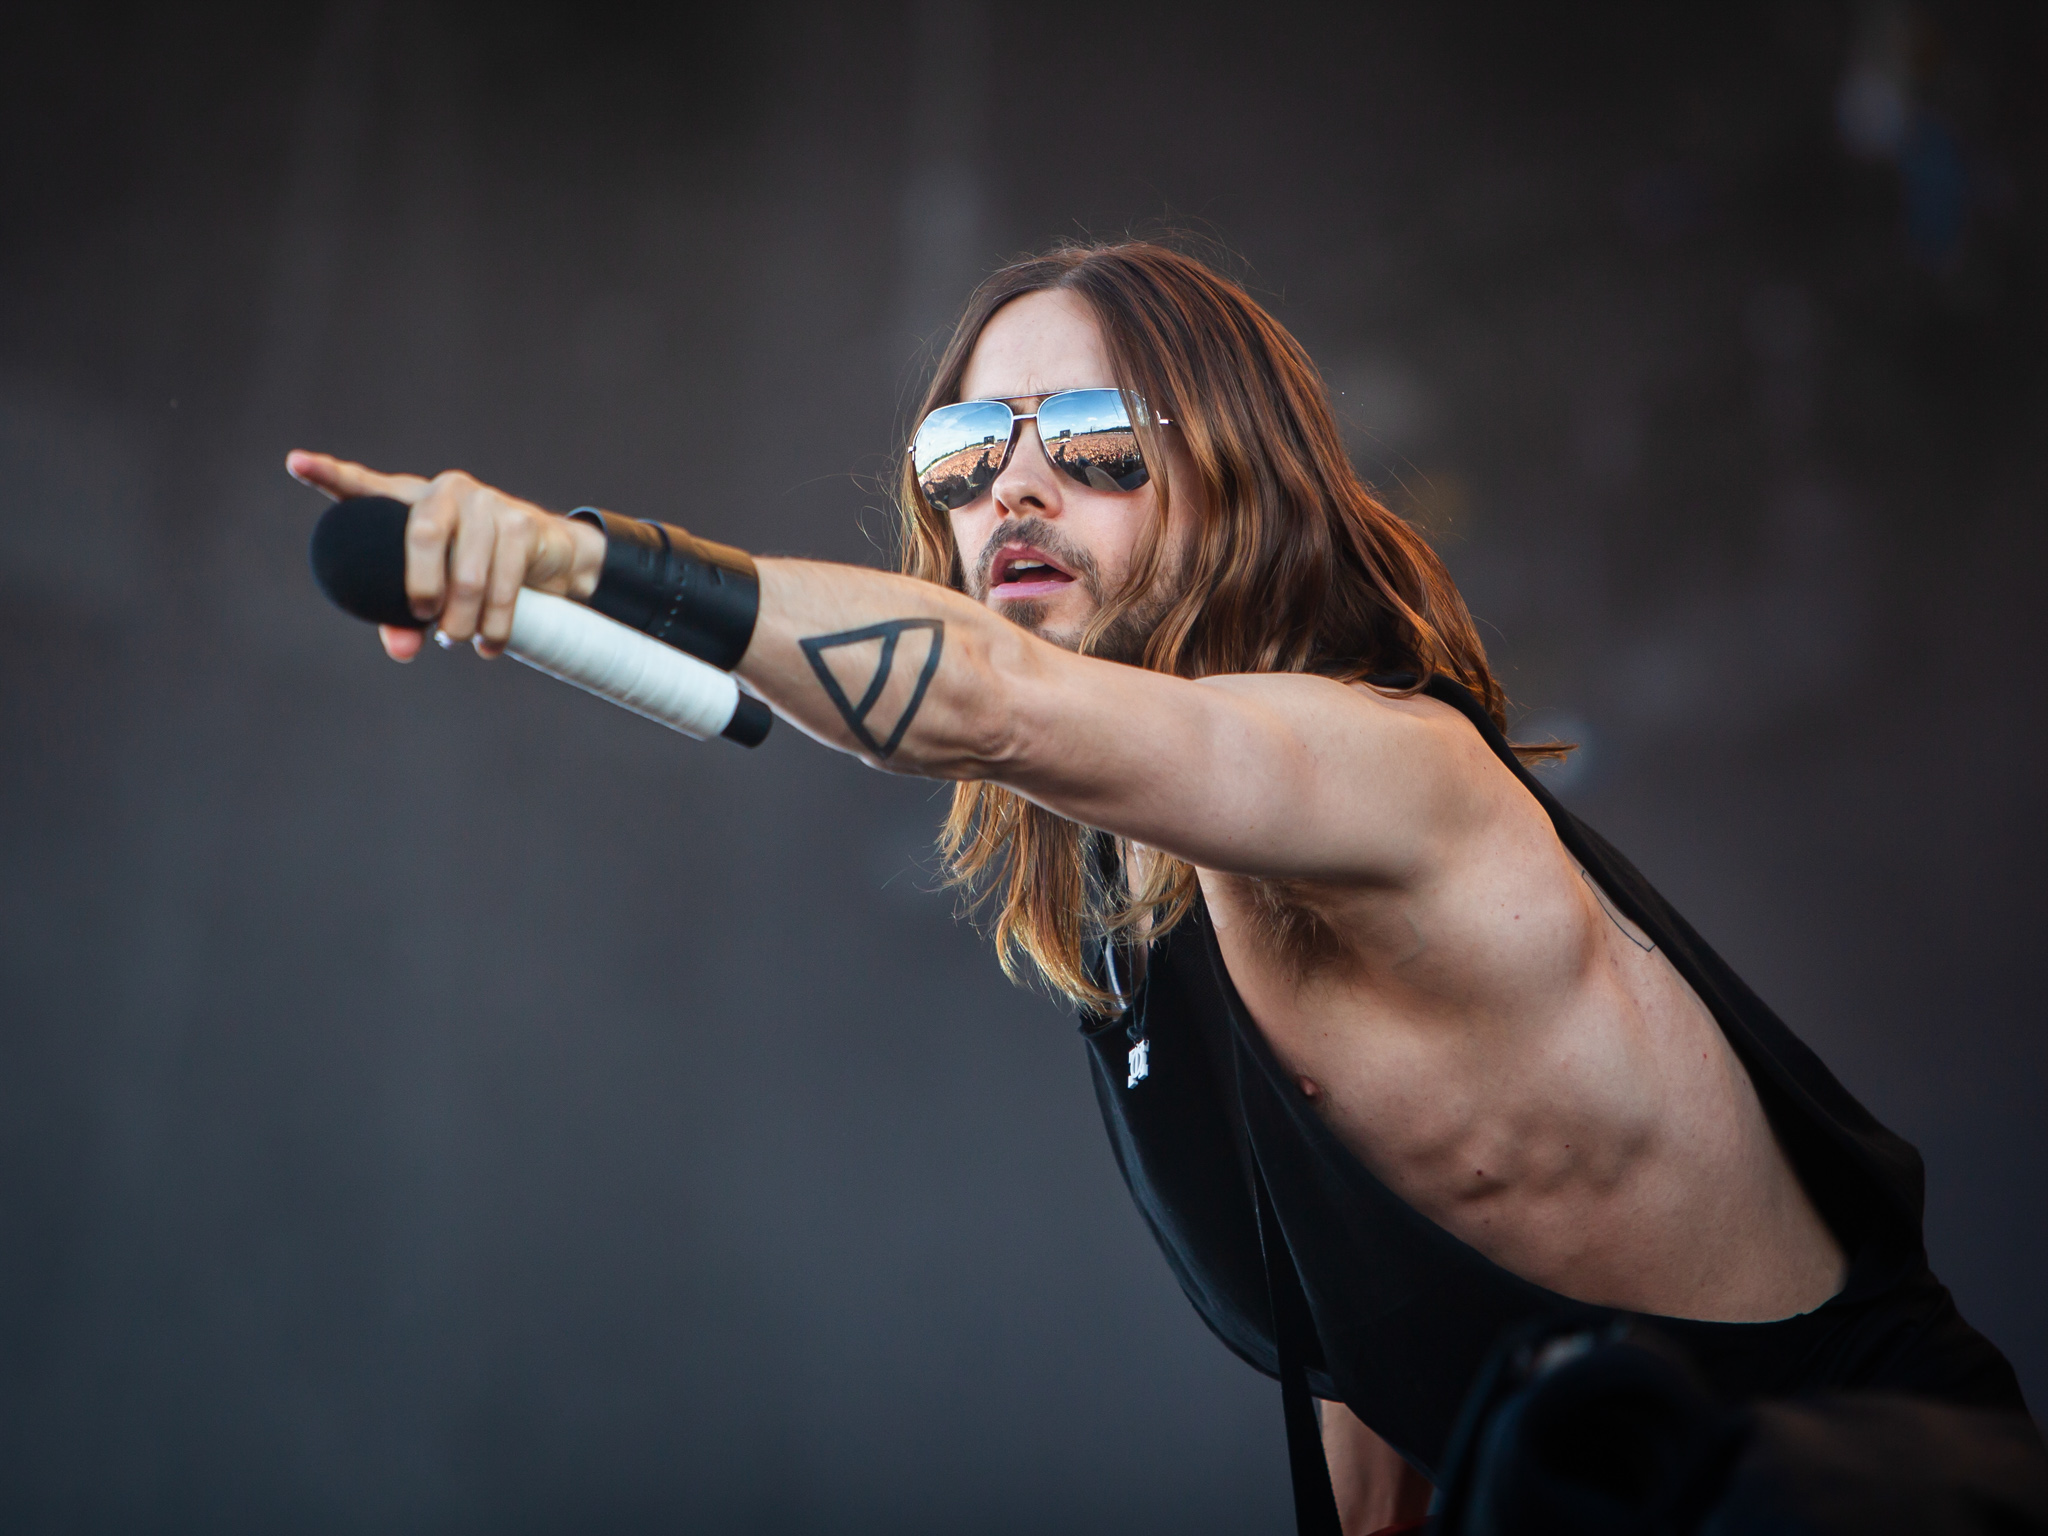 30 seconds to Mars by Bullet-ray Photography